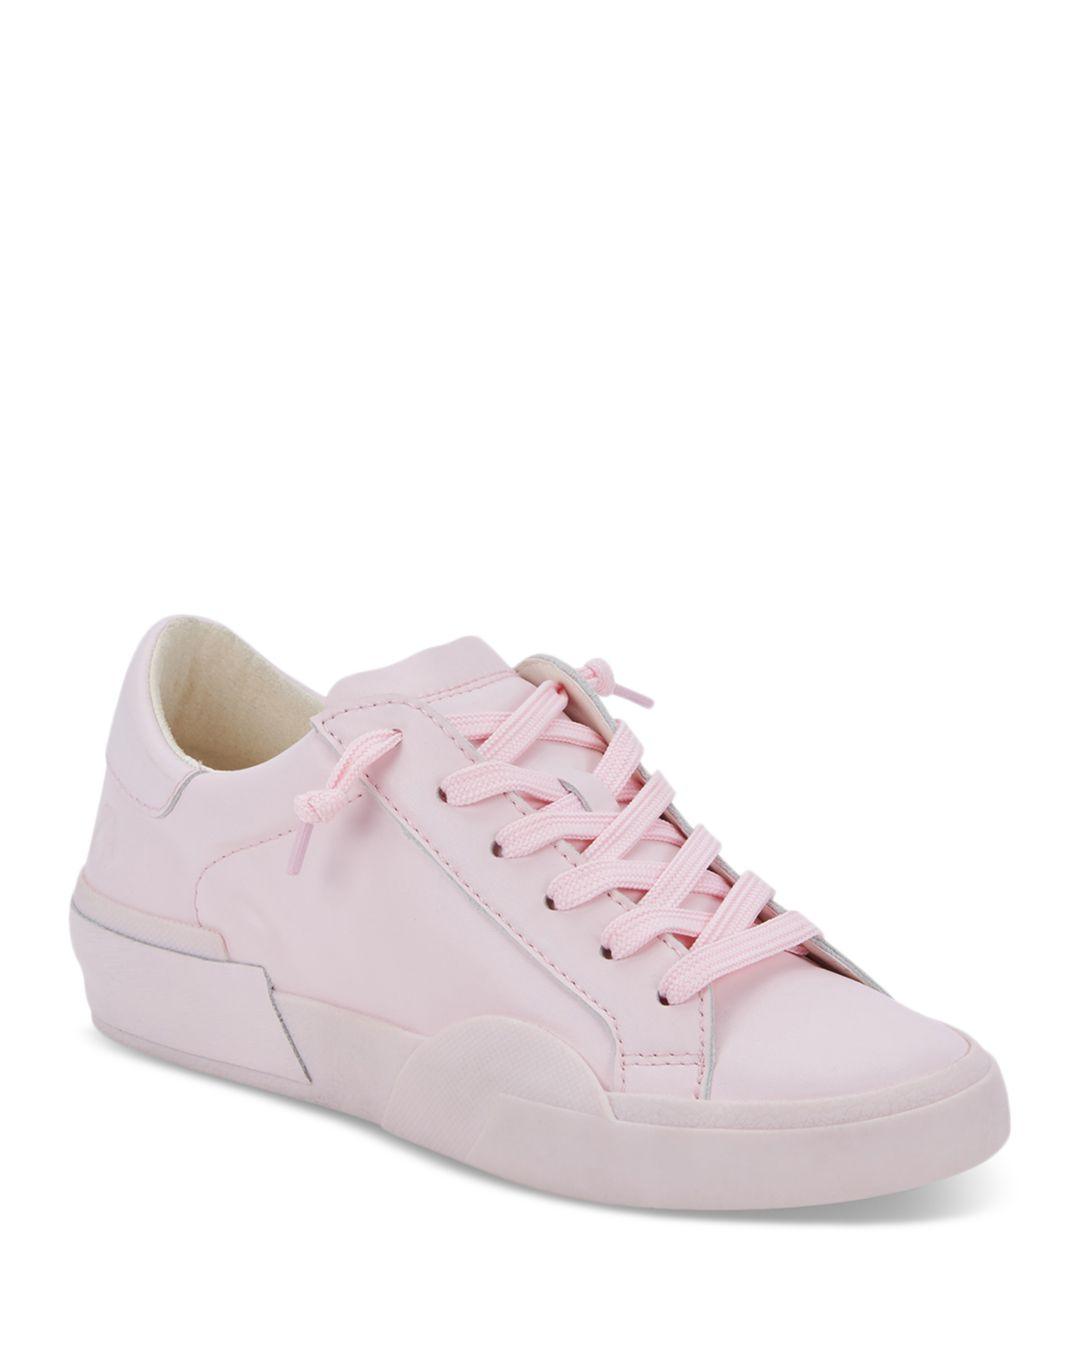 Dolce Vita Zina 360 Sneakers in Pink | Lyst